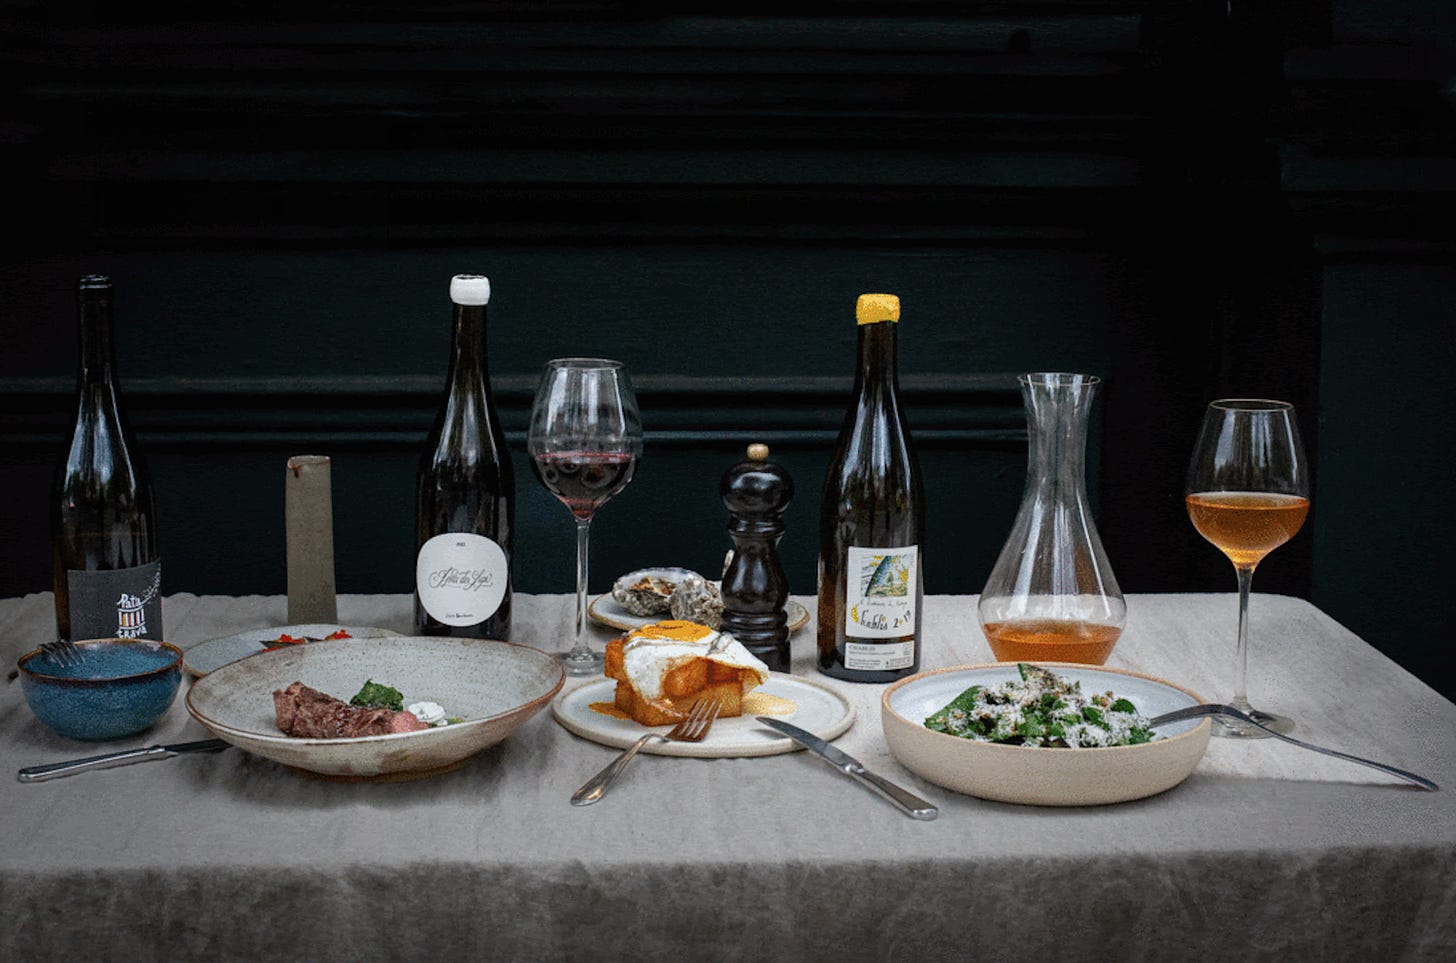 An array of modern food and wine in glasses and bottles